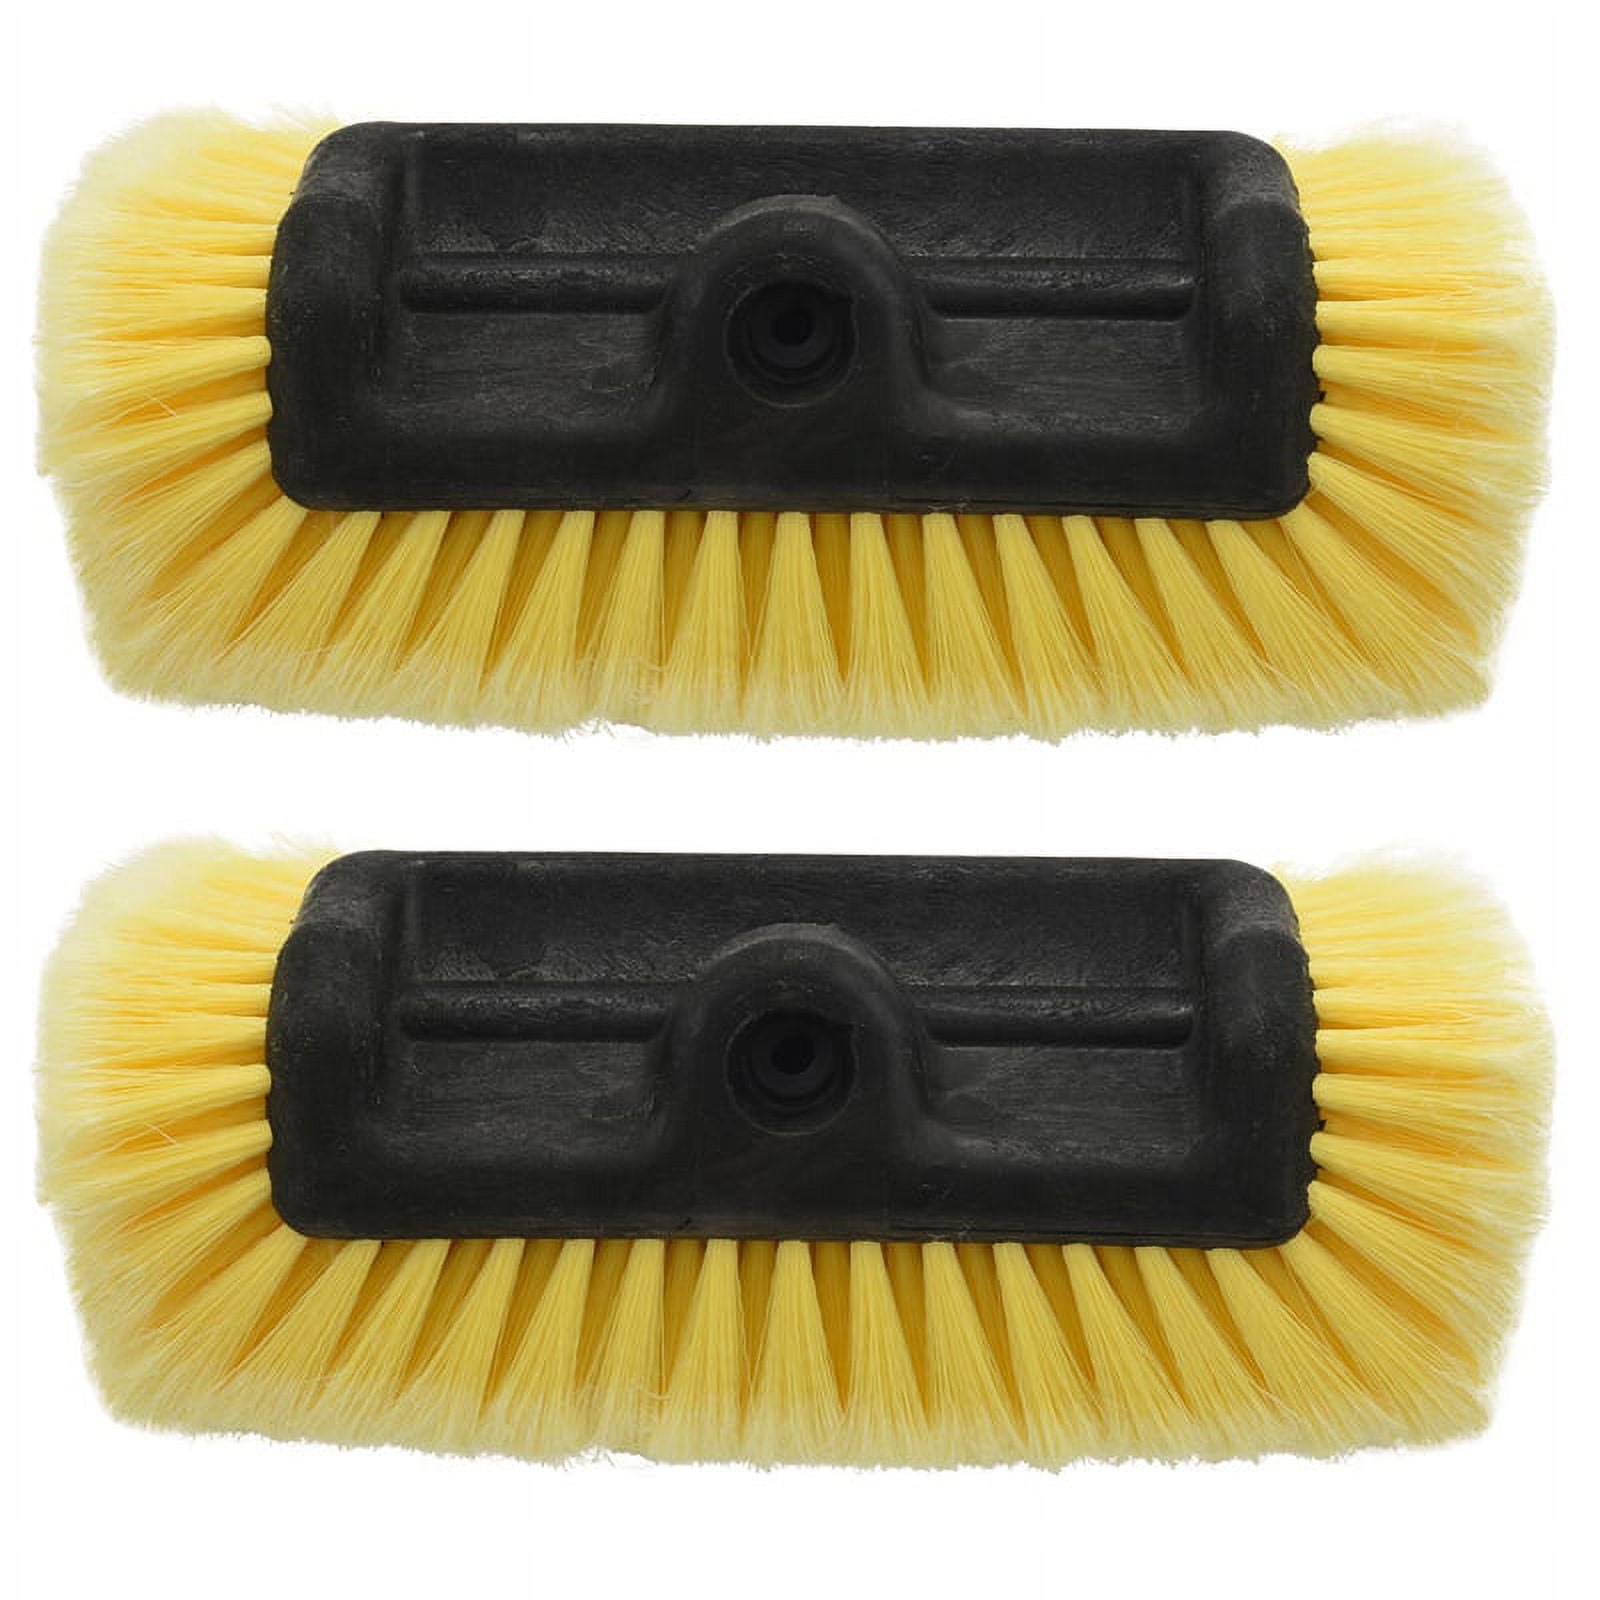 Replacement Cloth Cover for Car Long Handle Brush Head Car Wash Brush Plush  Mop Brush Cover 1pc Car Cleaning Car Accessories